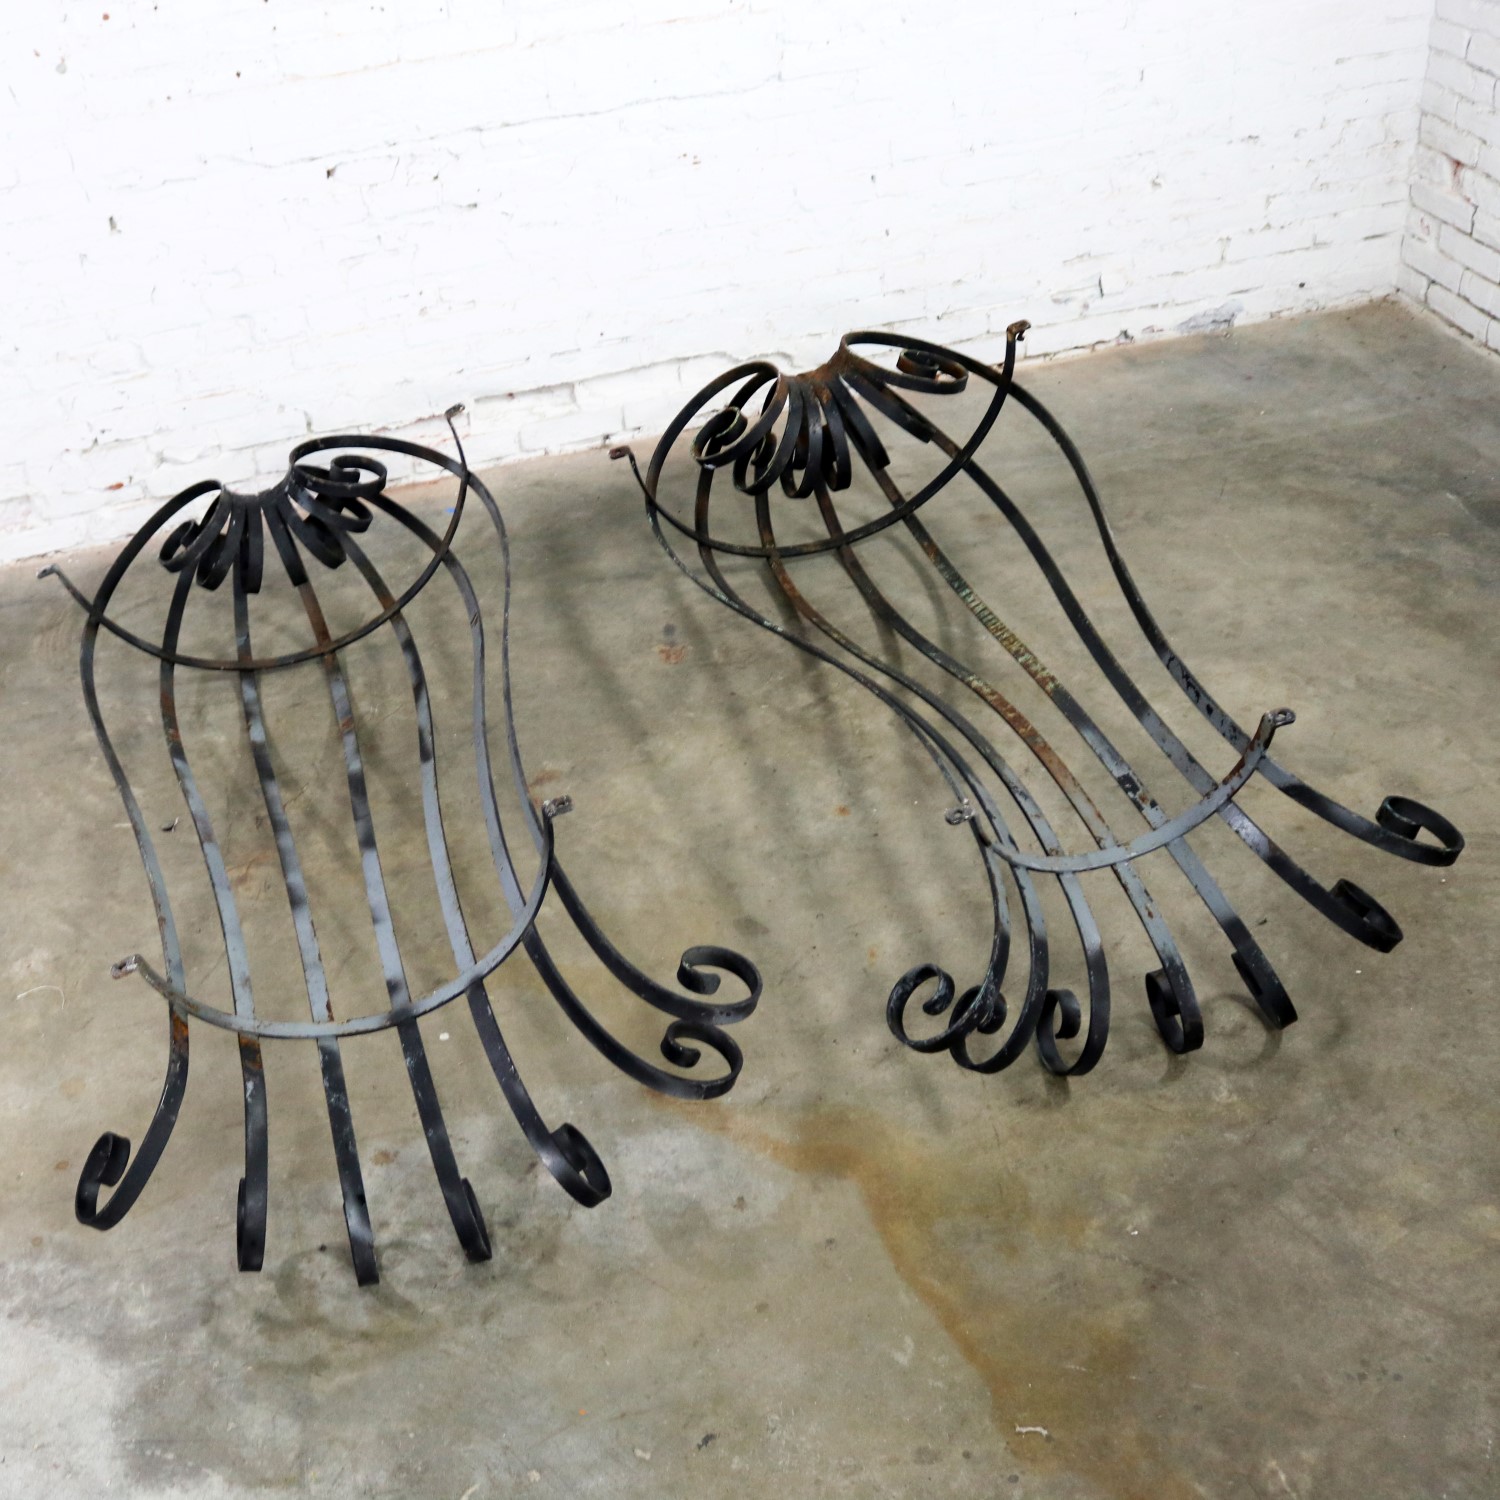 Architectural Antique Window Guards or Wall Urn Planters Hand Wrought Iron